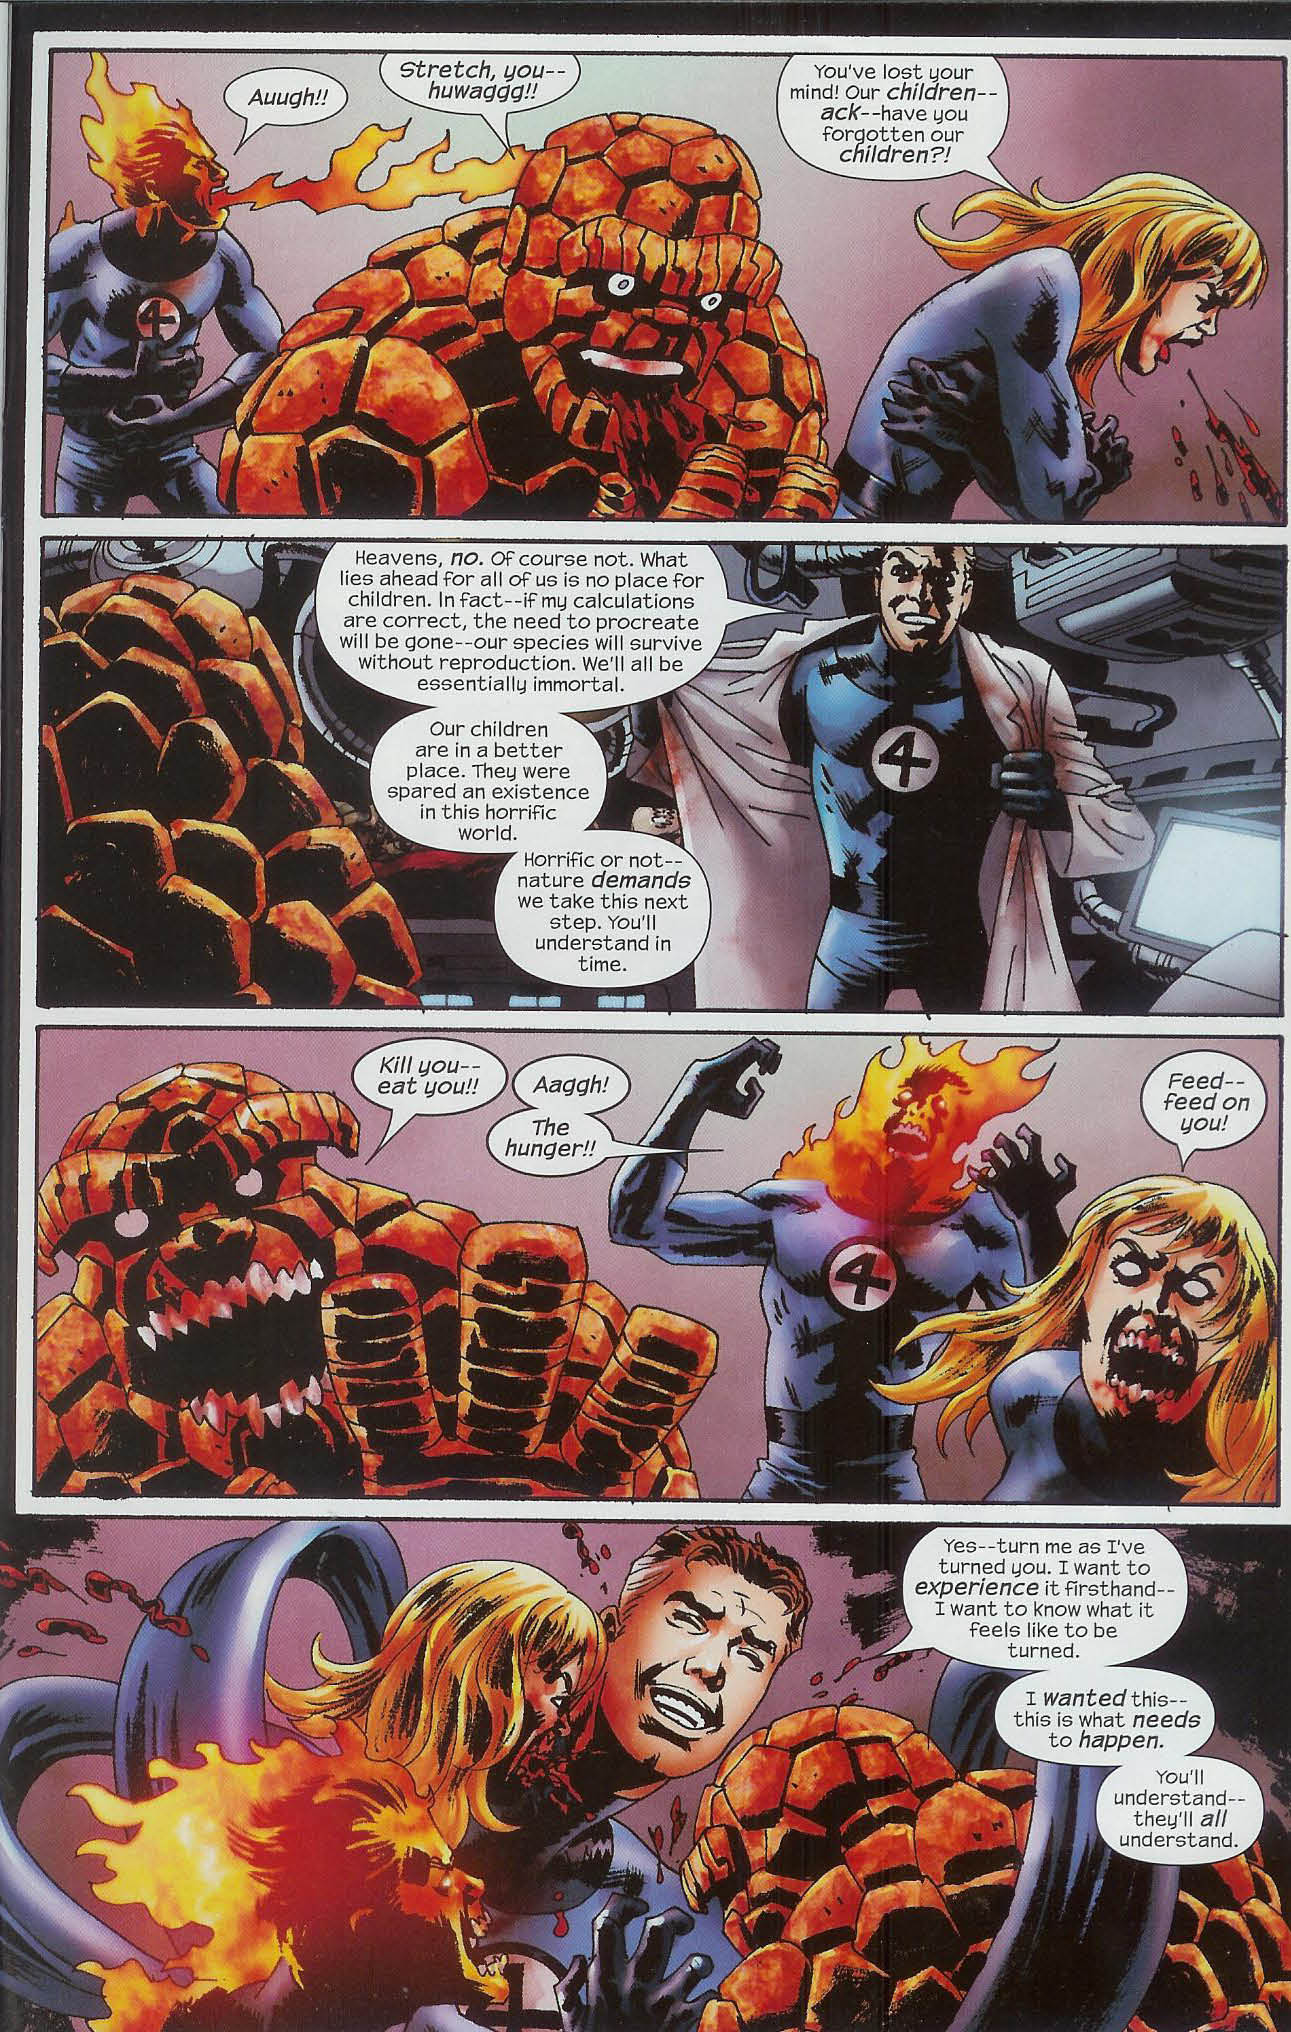 Marvel Zombies: Dead Days #17